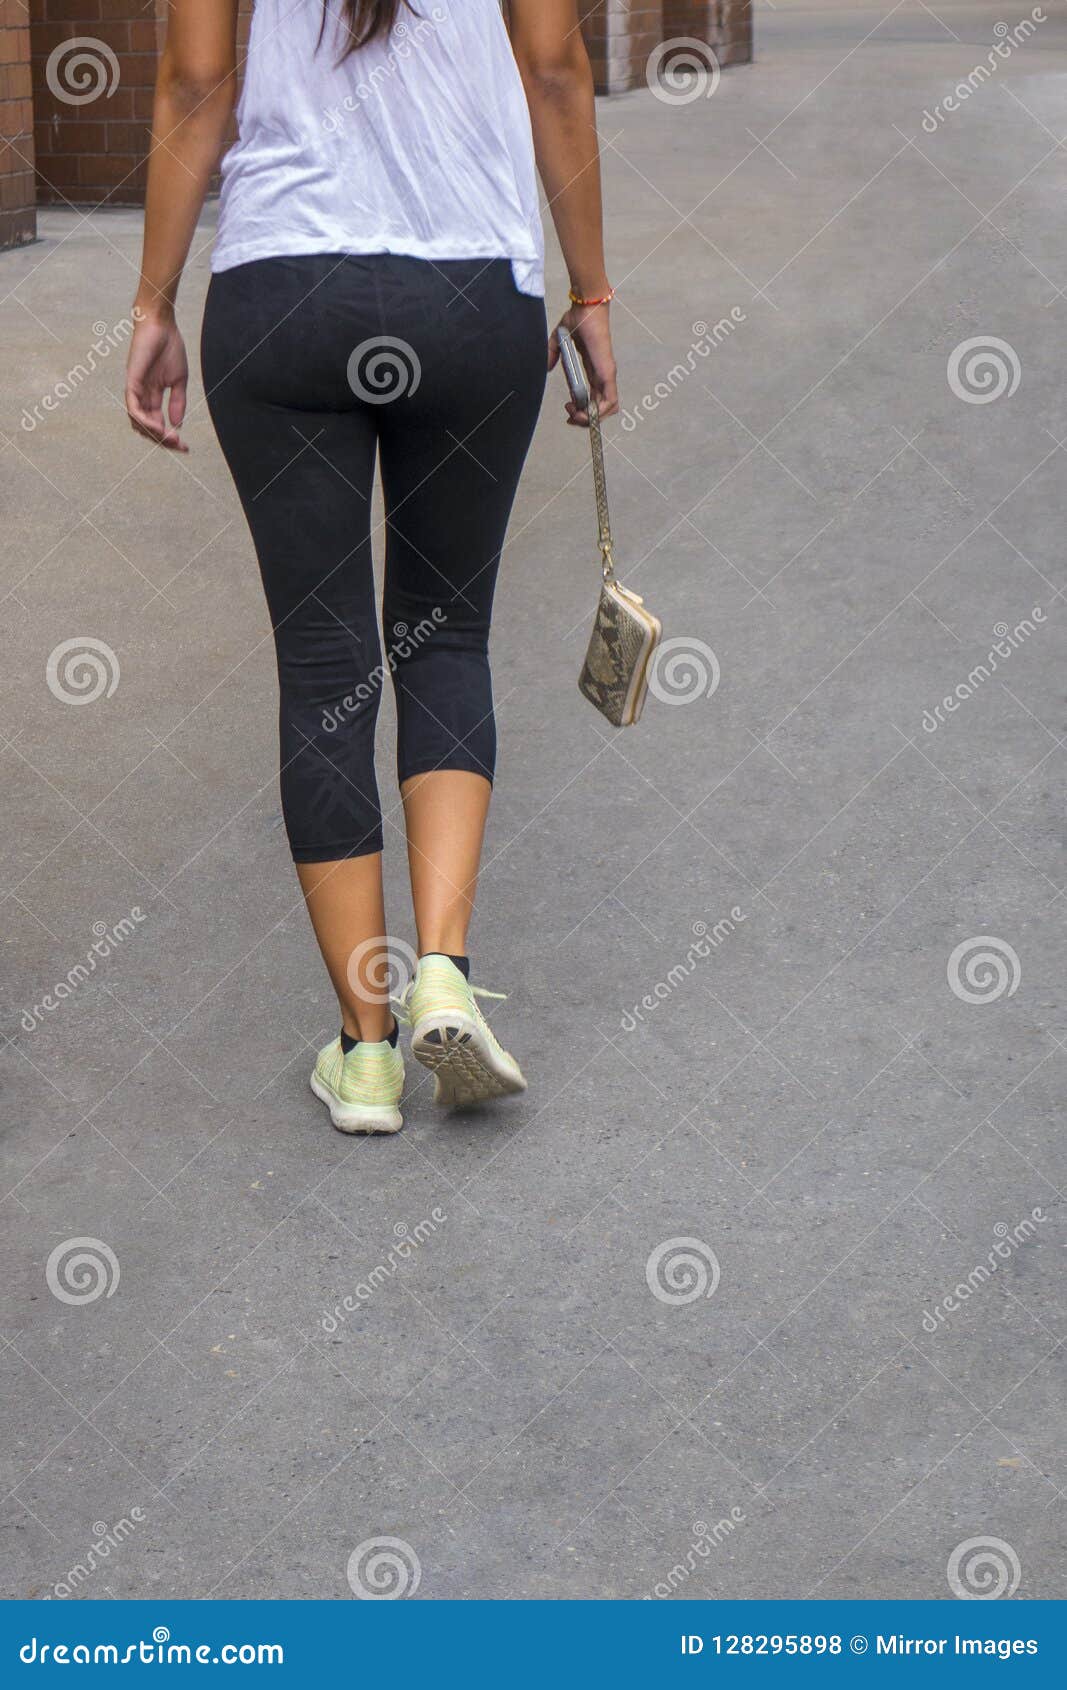 back of a woman walking holding a hanging pocketbook in yoga pan